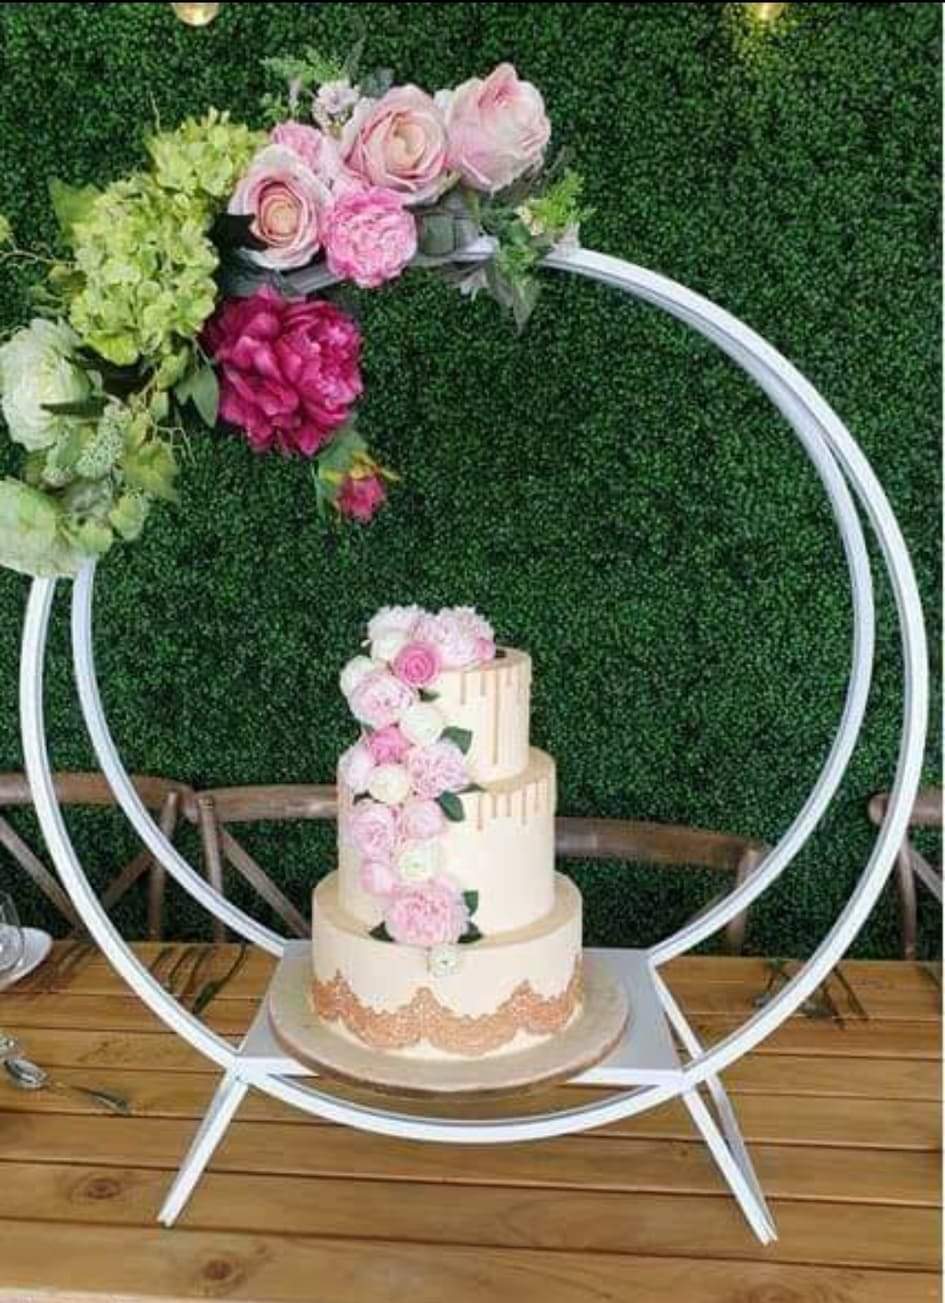 Wedding Rings - Top Off the Cake with This Idea | Spring wedding cake,  Pretty wedding cakes, Silhouette cake